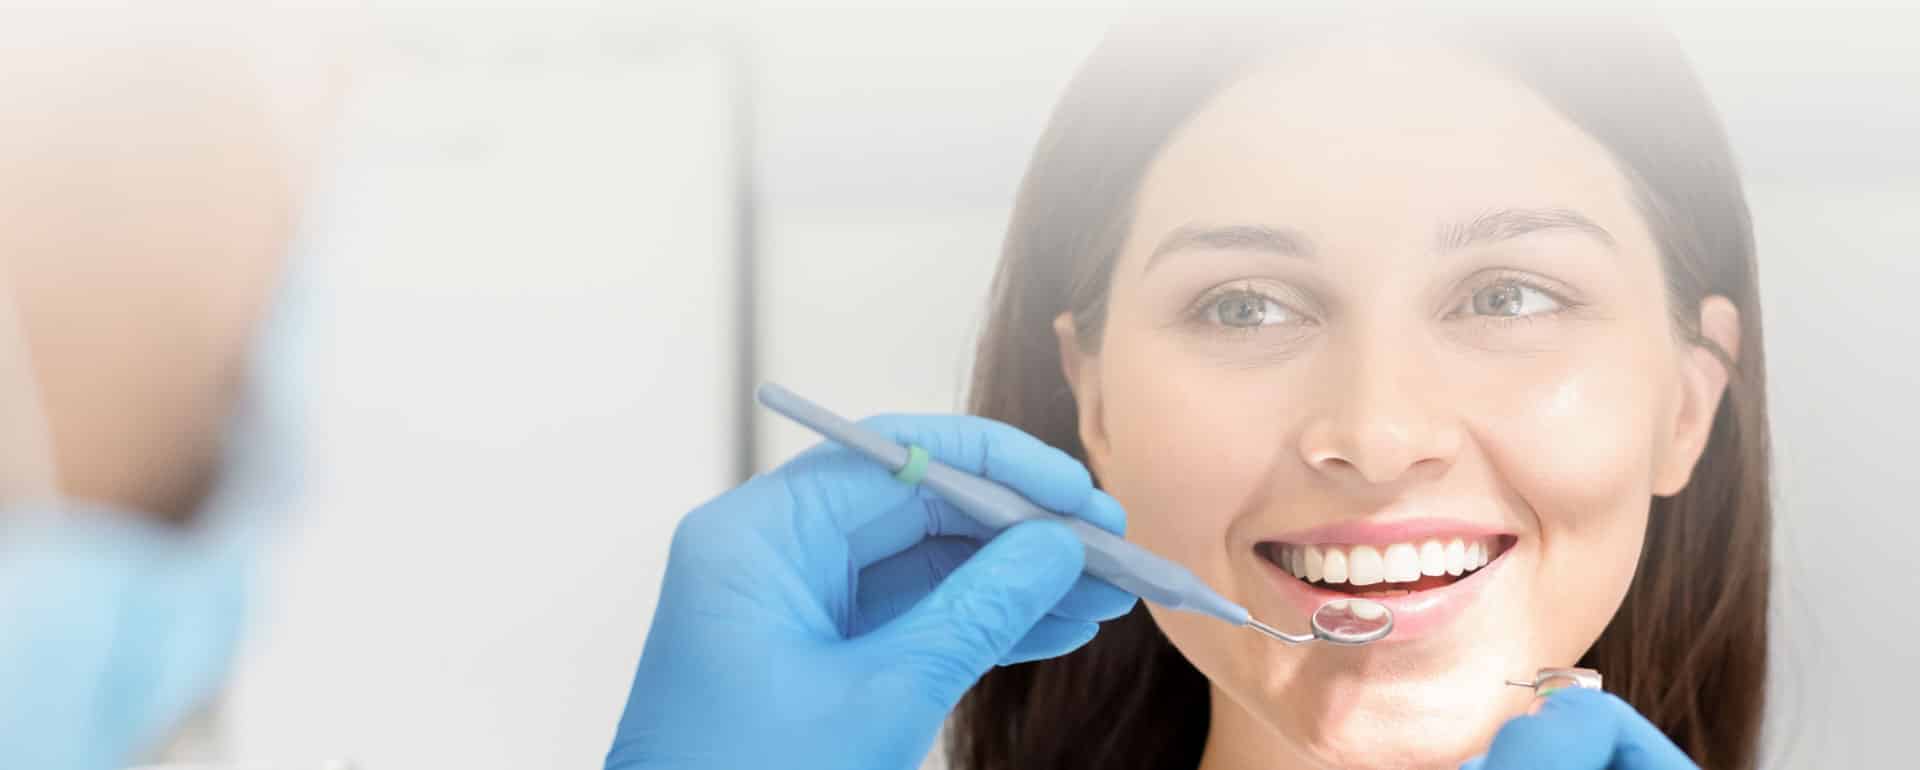 ABOUT FAMILY SMILES DENTAL CARE